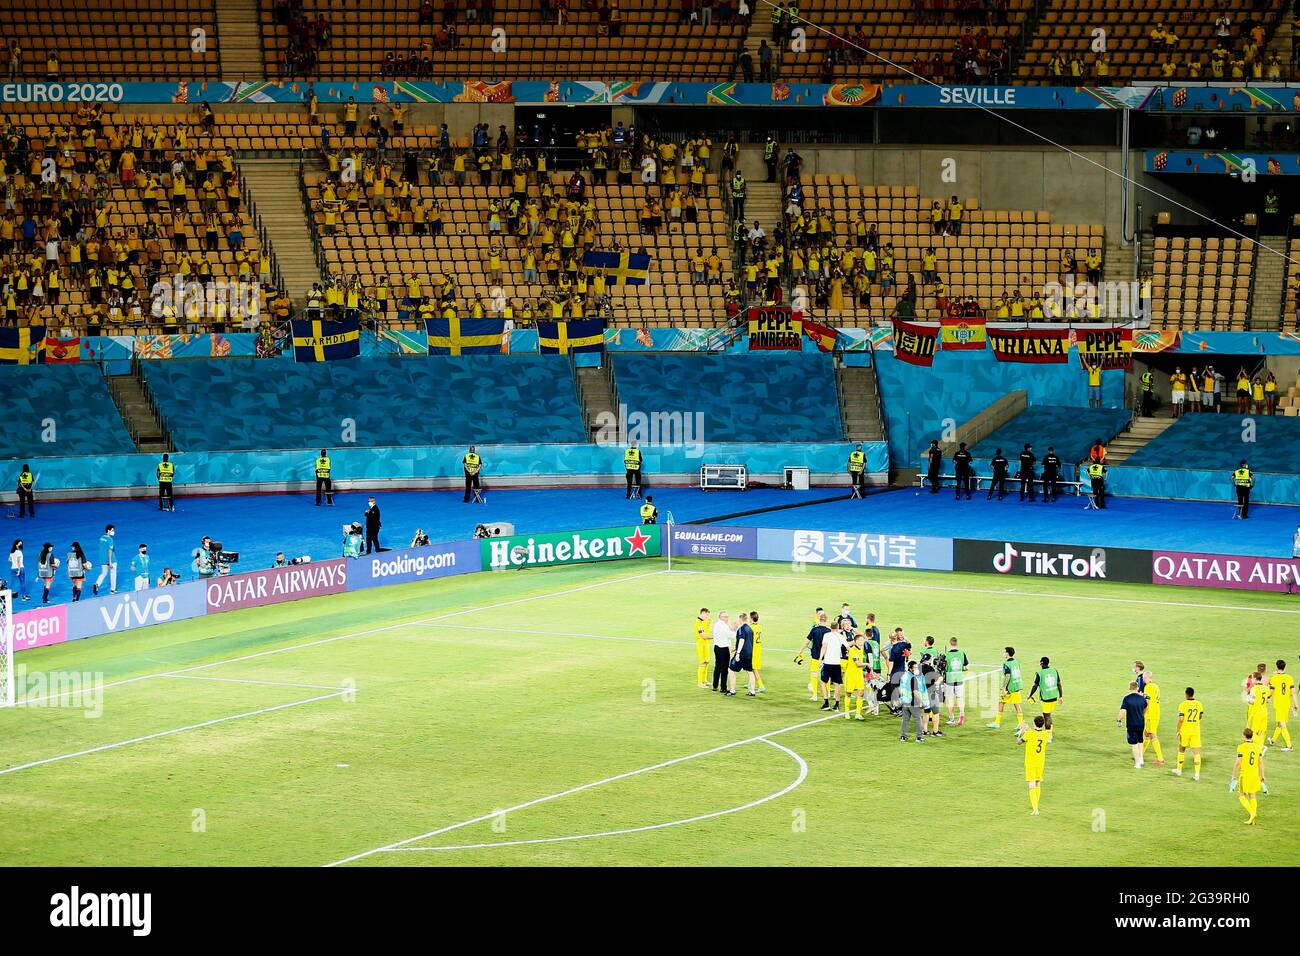 Sevilla, Spain. 14th June, 2021. Sweden team and fans Football/Soccer : General view of The Swedish players are cheered on by their home fans after UEFA Euro 2020 Group E match between Spain 0-0 Sweden at the La Cartuja Stadium in Sevilla, Spain . Credit: Mutsu Kawamori/AFLO/Alamy Live News Stock Photo